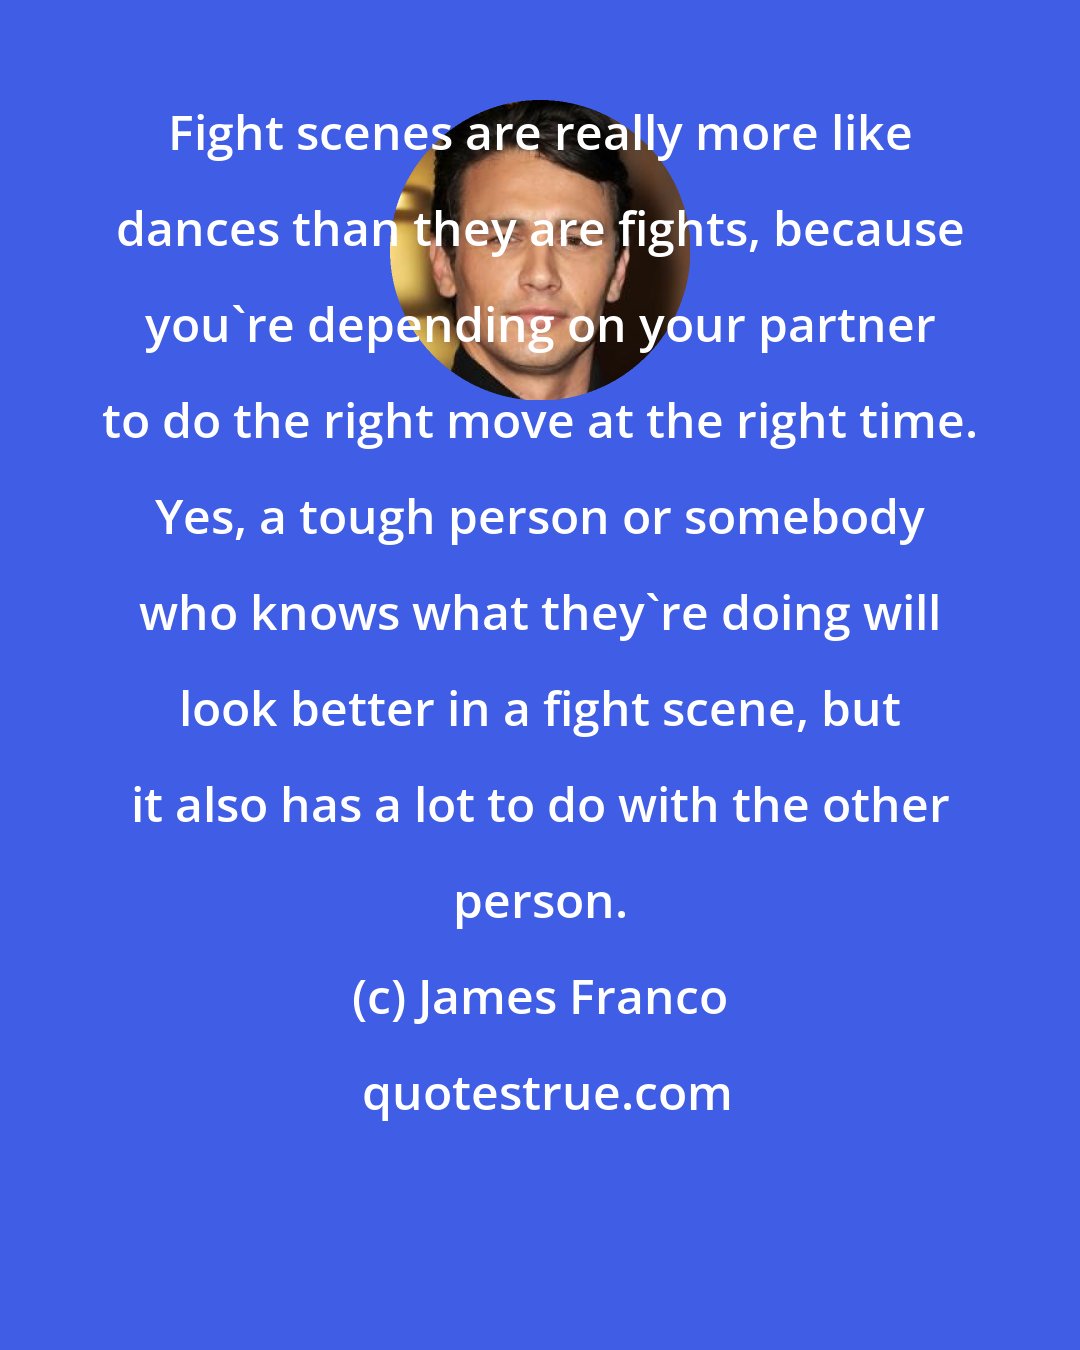 James Franco: Fight scenes are really more like dances than they are fights, because you're depending on your partner to do the right move at the right time. Yes, a tough person or somebody who knows what they're doing will look better in a fight scene, but it also has a lot to do with the other person.